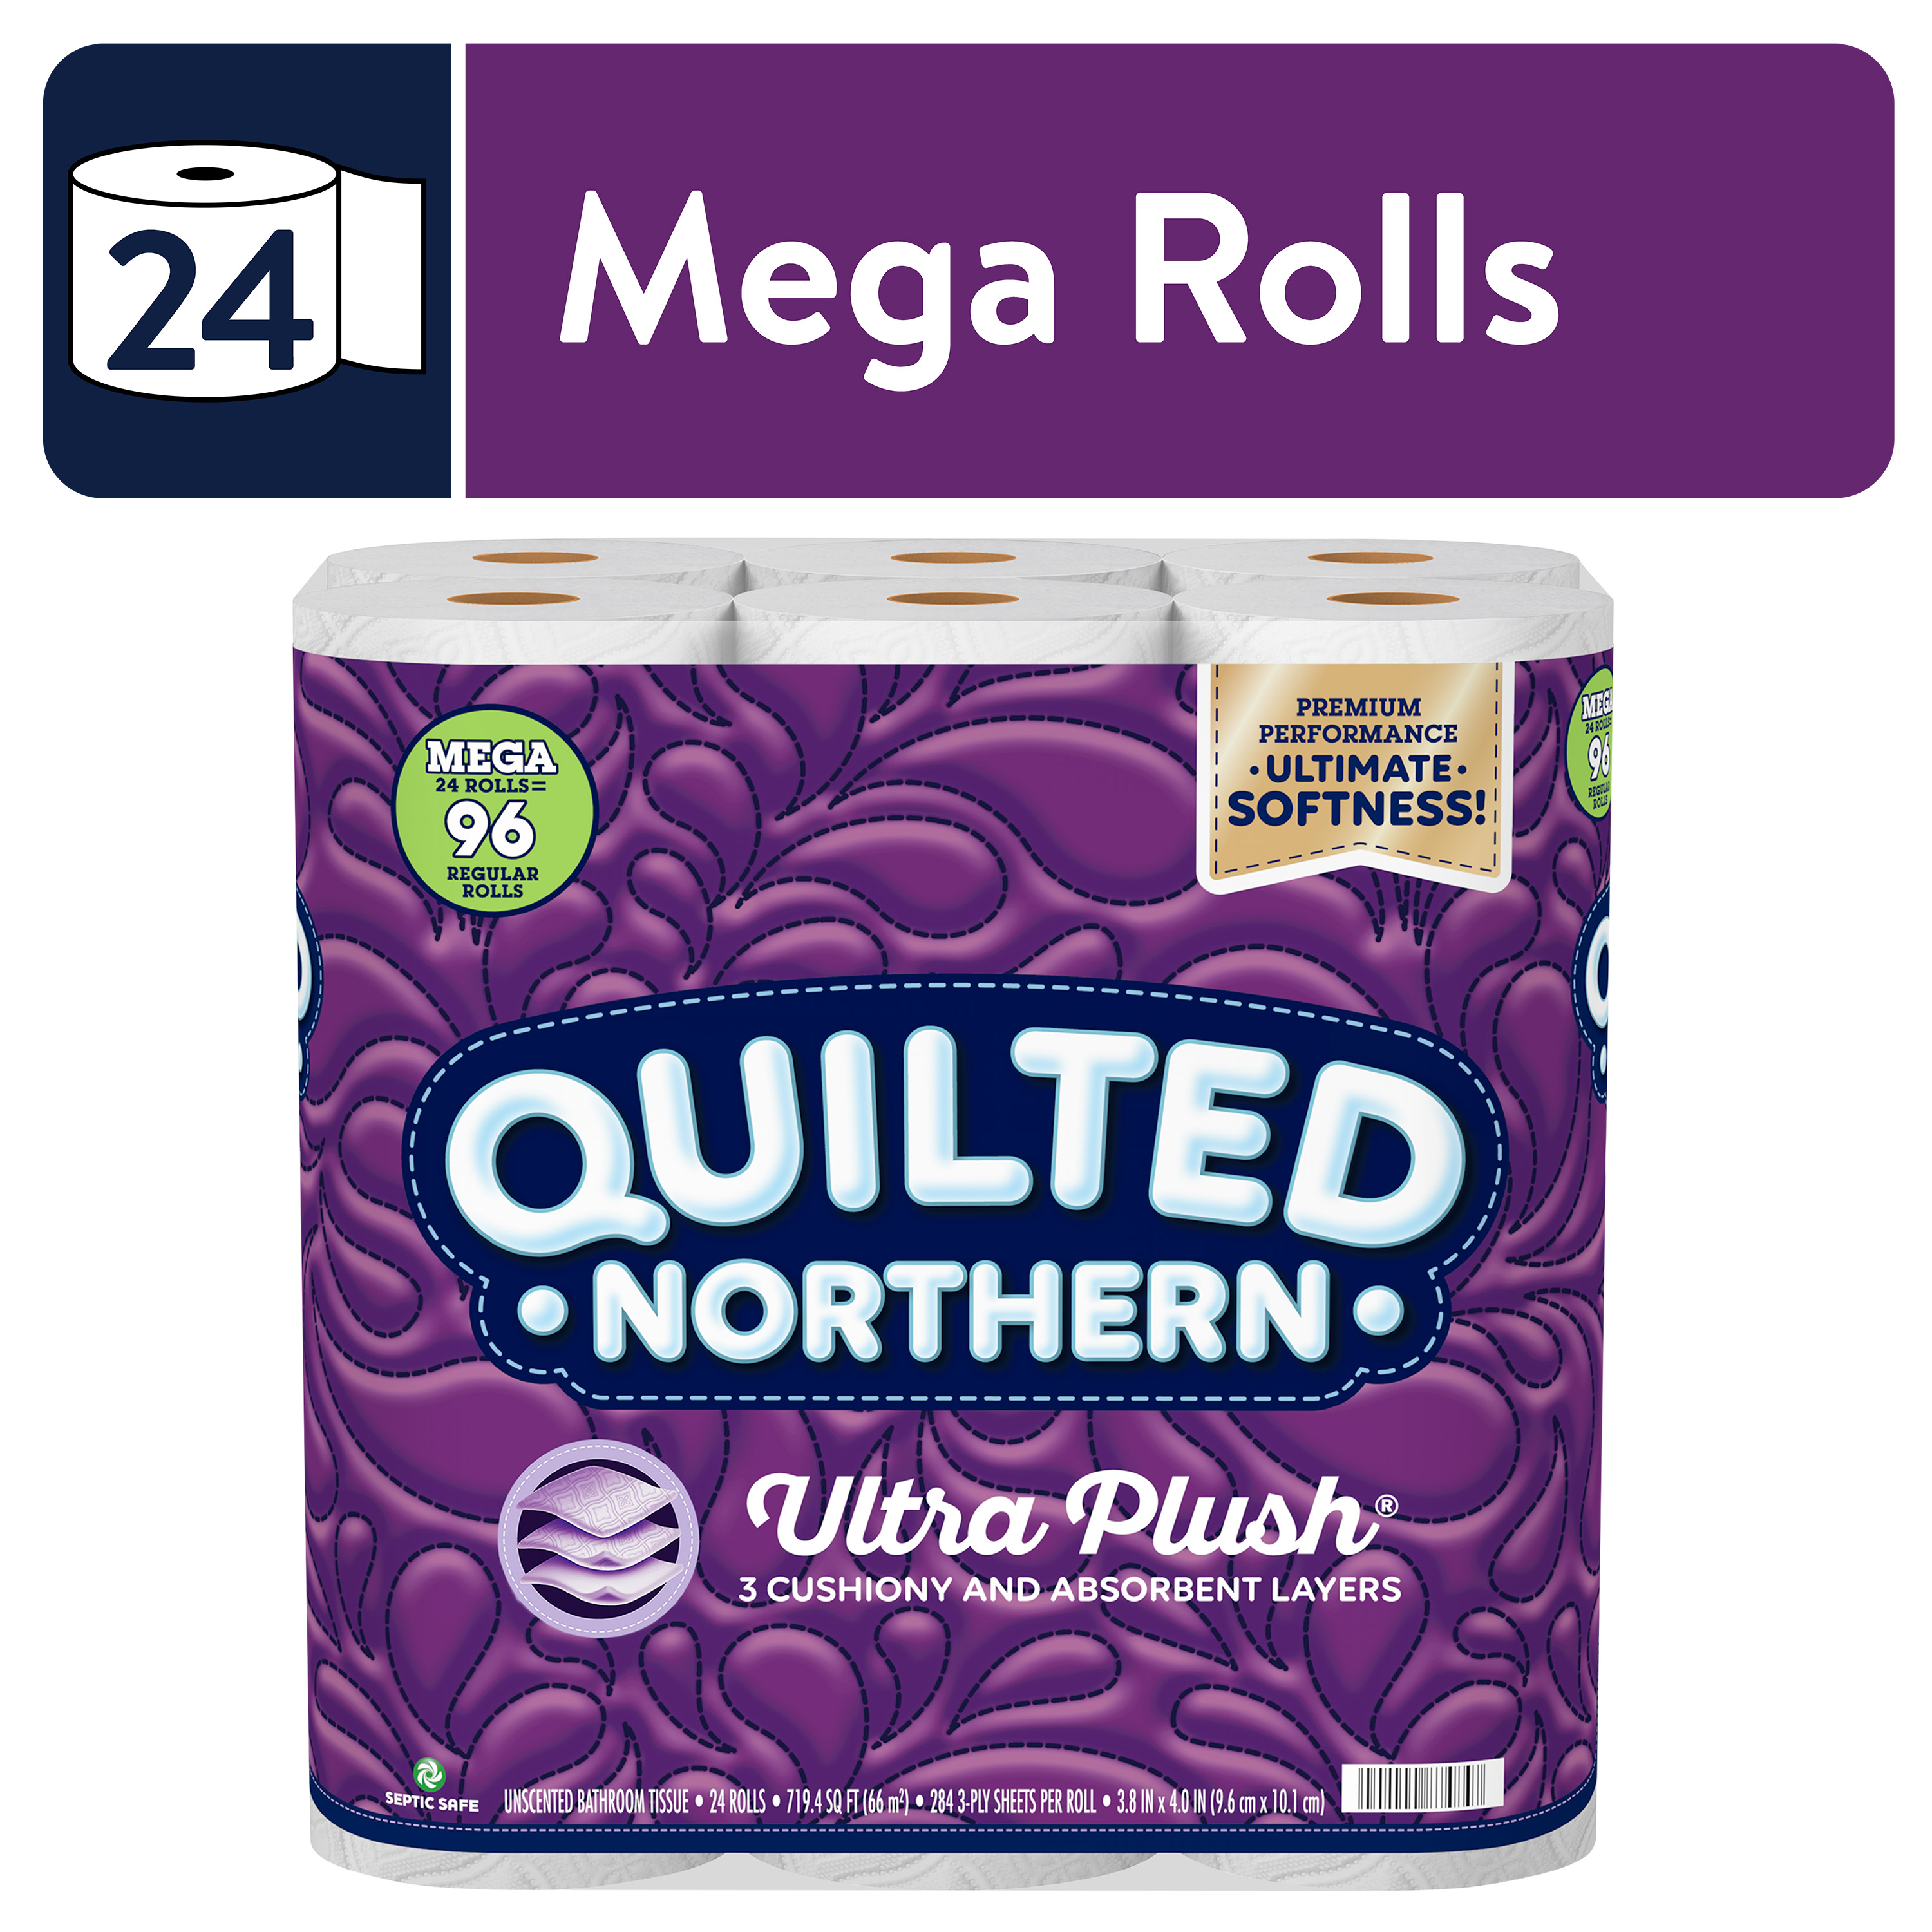 Quilted Northern Ultra Plush Toilet Paper, 24 Mega Rolls - image 1 of 13